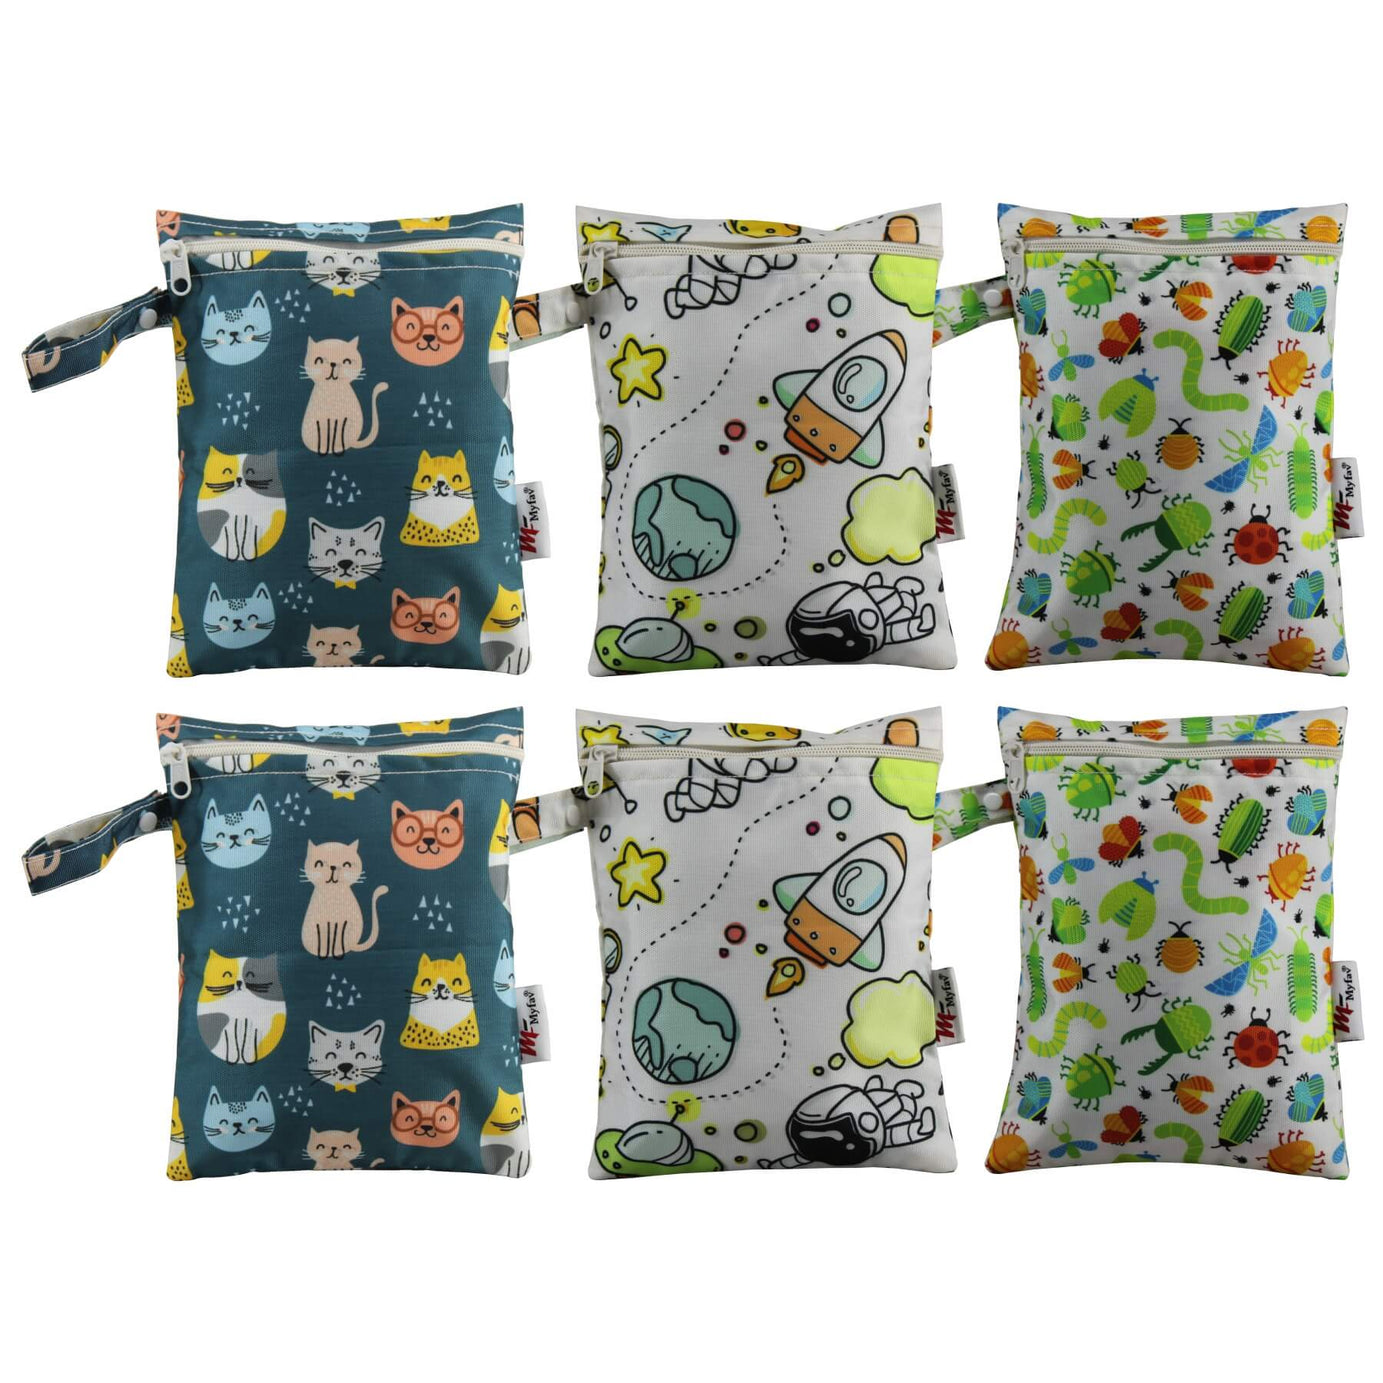 My Fav Multicolor Multiutility Wet Dry Pouch/Diaper Bag/Travel Pouch/Travel Kit - Pack of 6